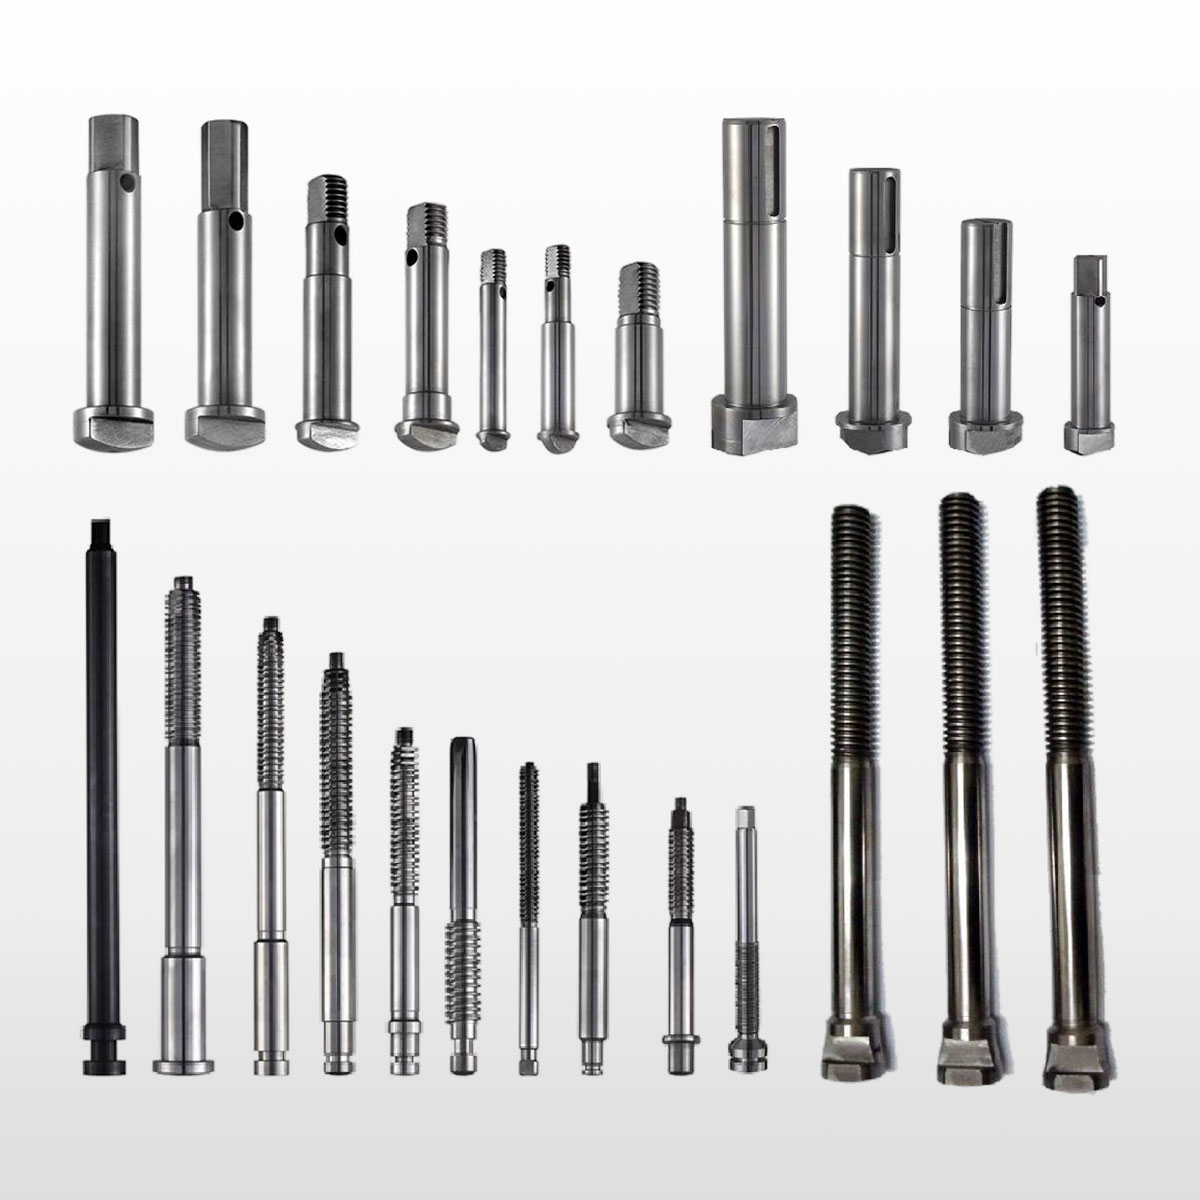 A collection of valve stems from AlterValve.